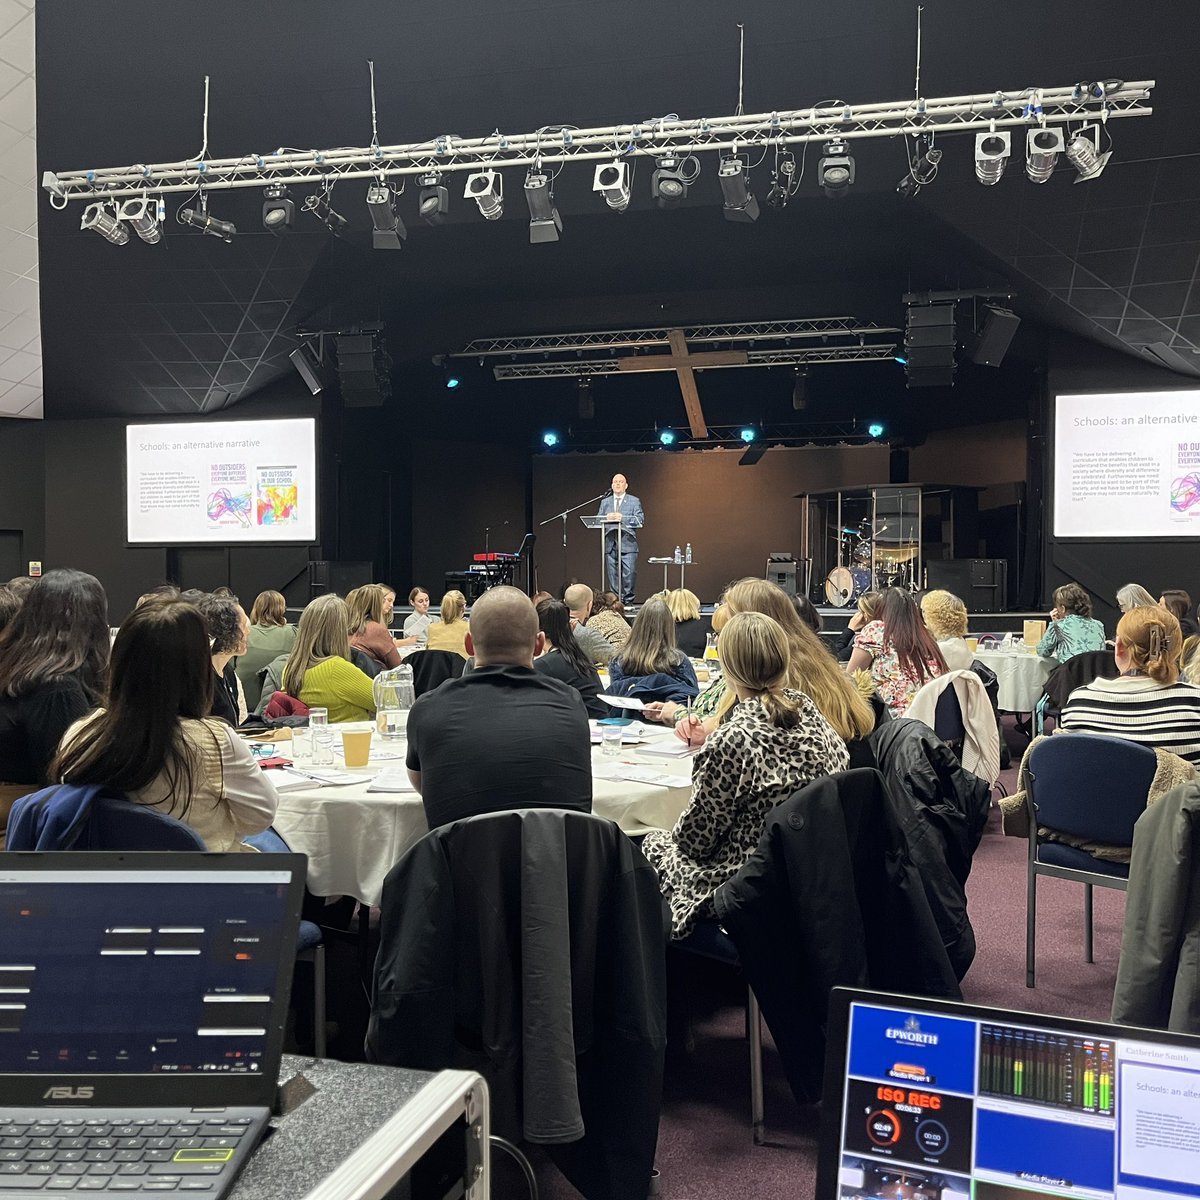 Today I’m in Bolton, filming the Epworth Education Trust staff conference, including filming three workshops running at the same time.
If you have an event coming up that you would like filmed or livestreamed, drop us a line.

#OnlineEvents #FilmedConference #TechSupport @EETCEO